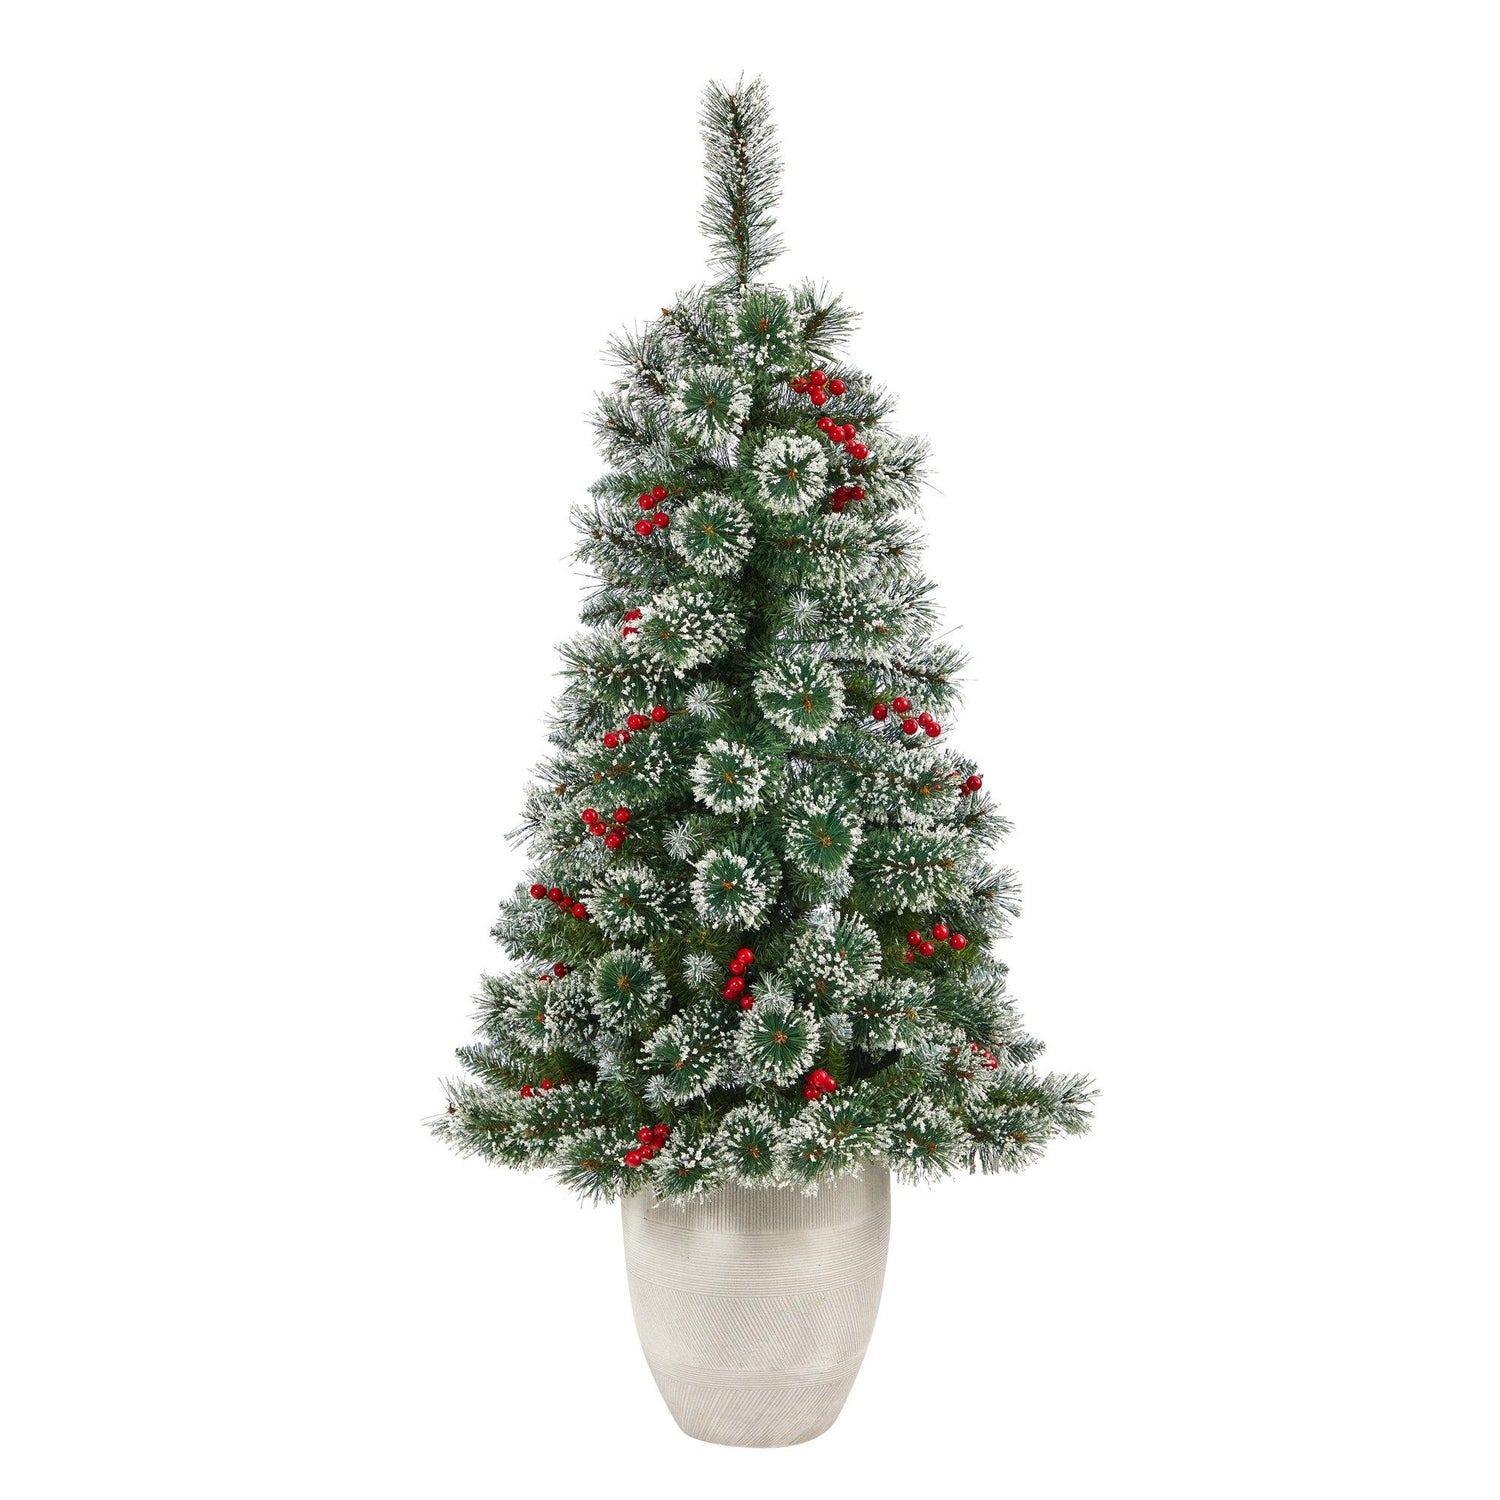 50” Frosted Swiss Pine Artificial Christmas Tree with 100 Clear LED Lights and Berries in White Planter